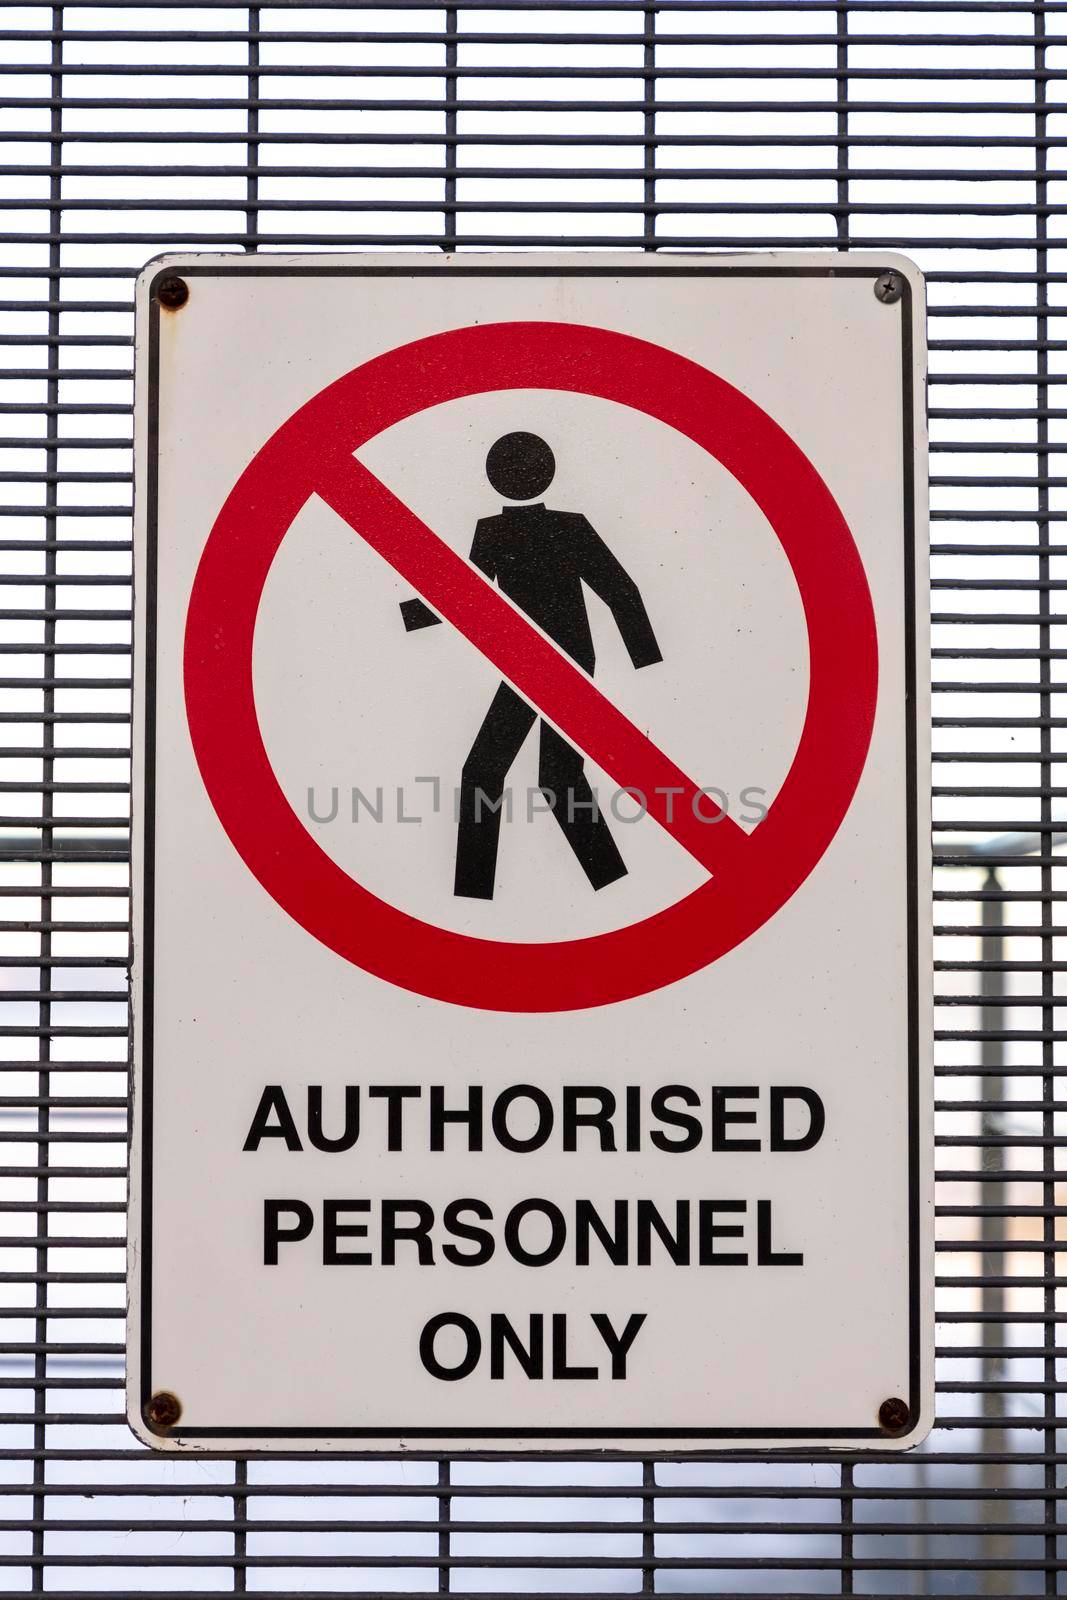 An authorised personnel only sign on a metal gate by WittkePhotos